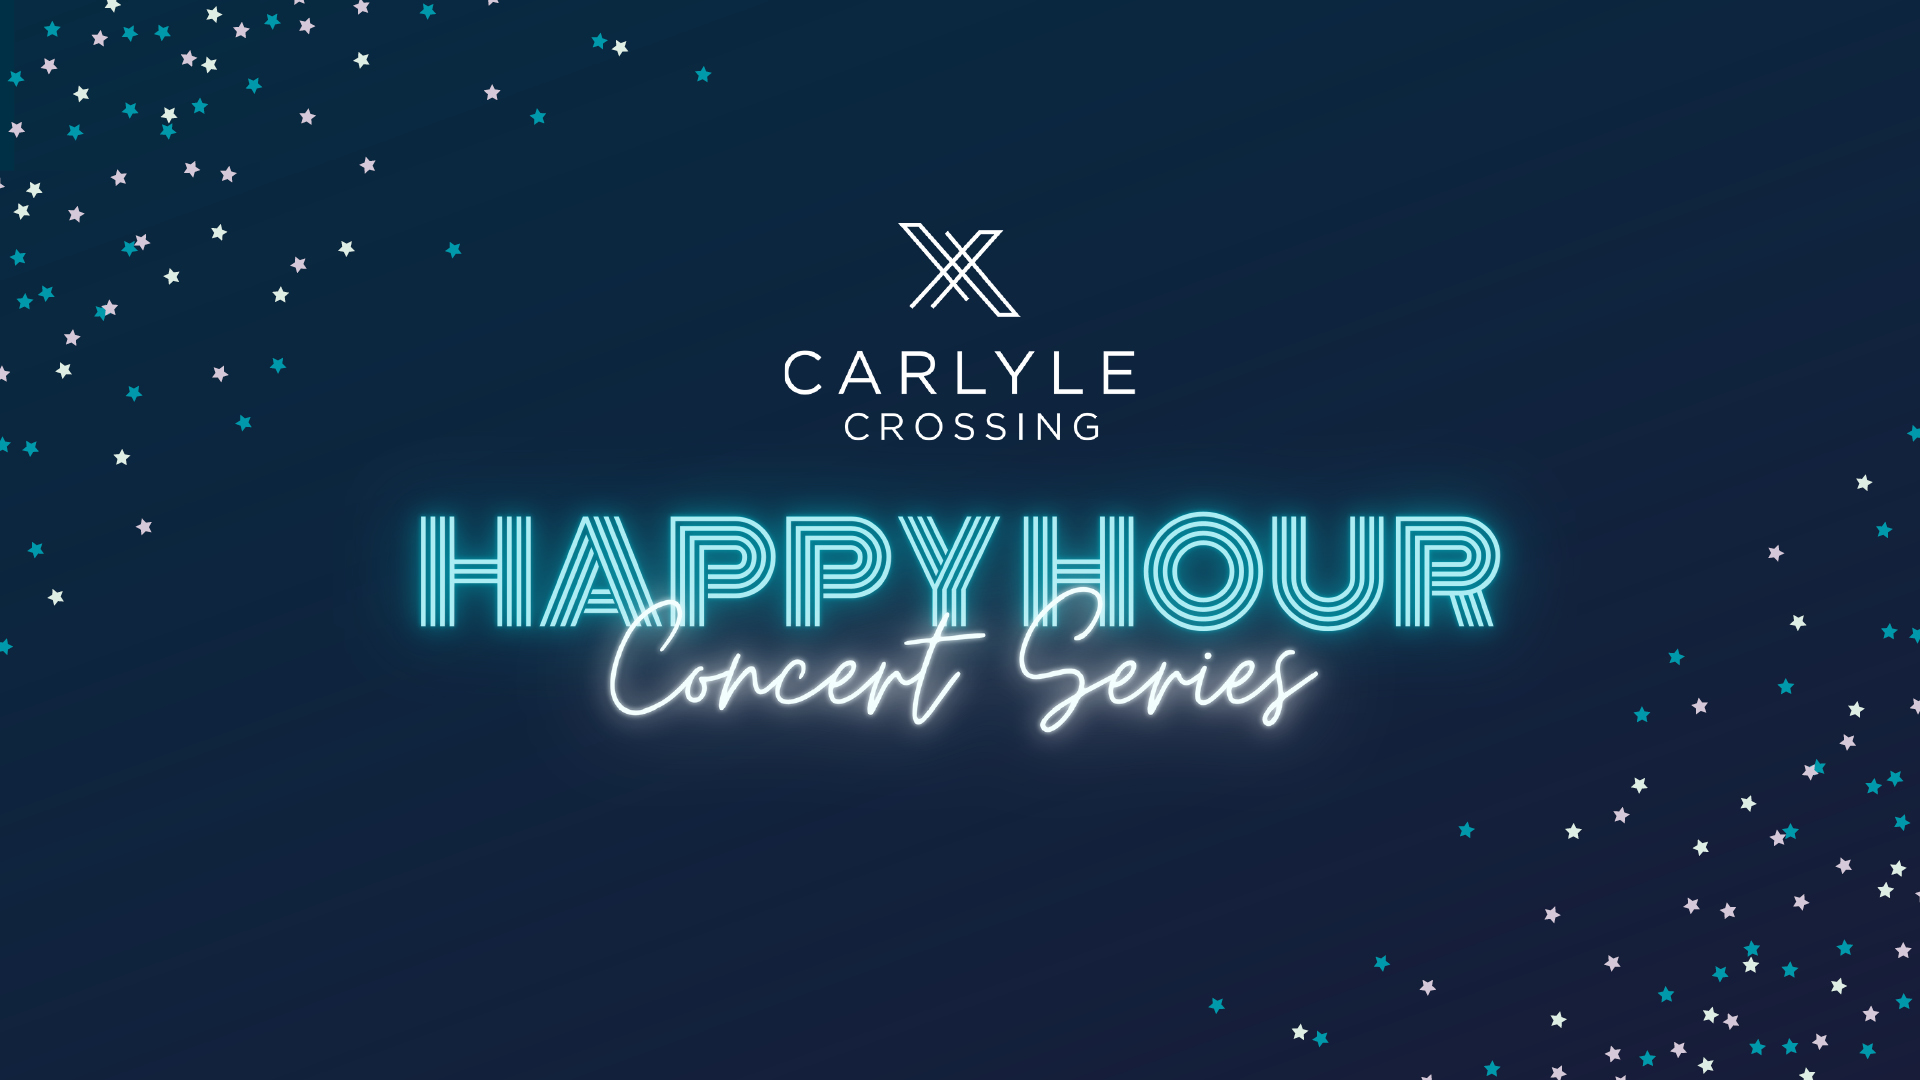 Happy Hour Concert Series at Carlyle Crossing: Lonny Taylor